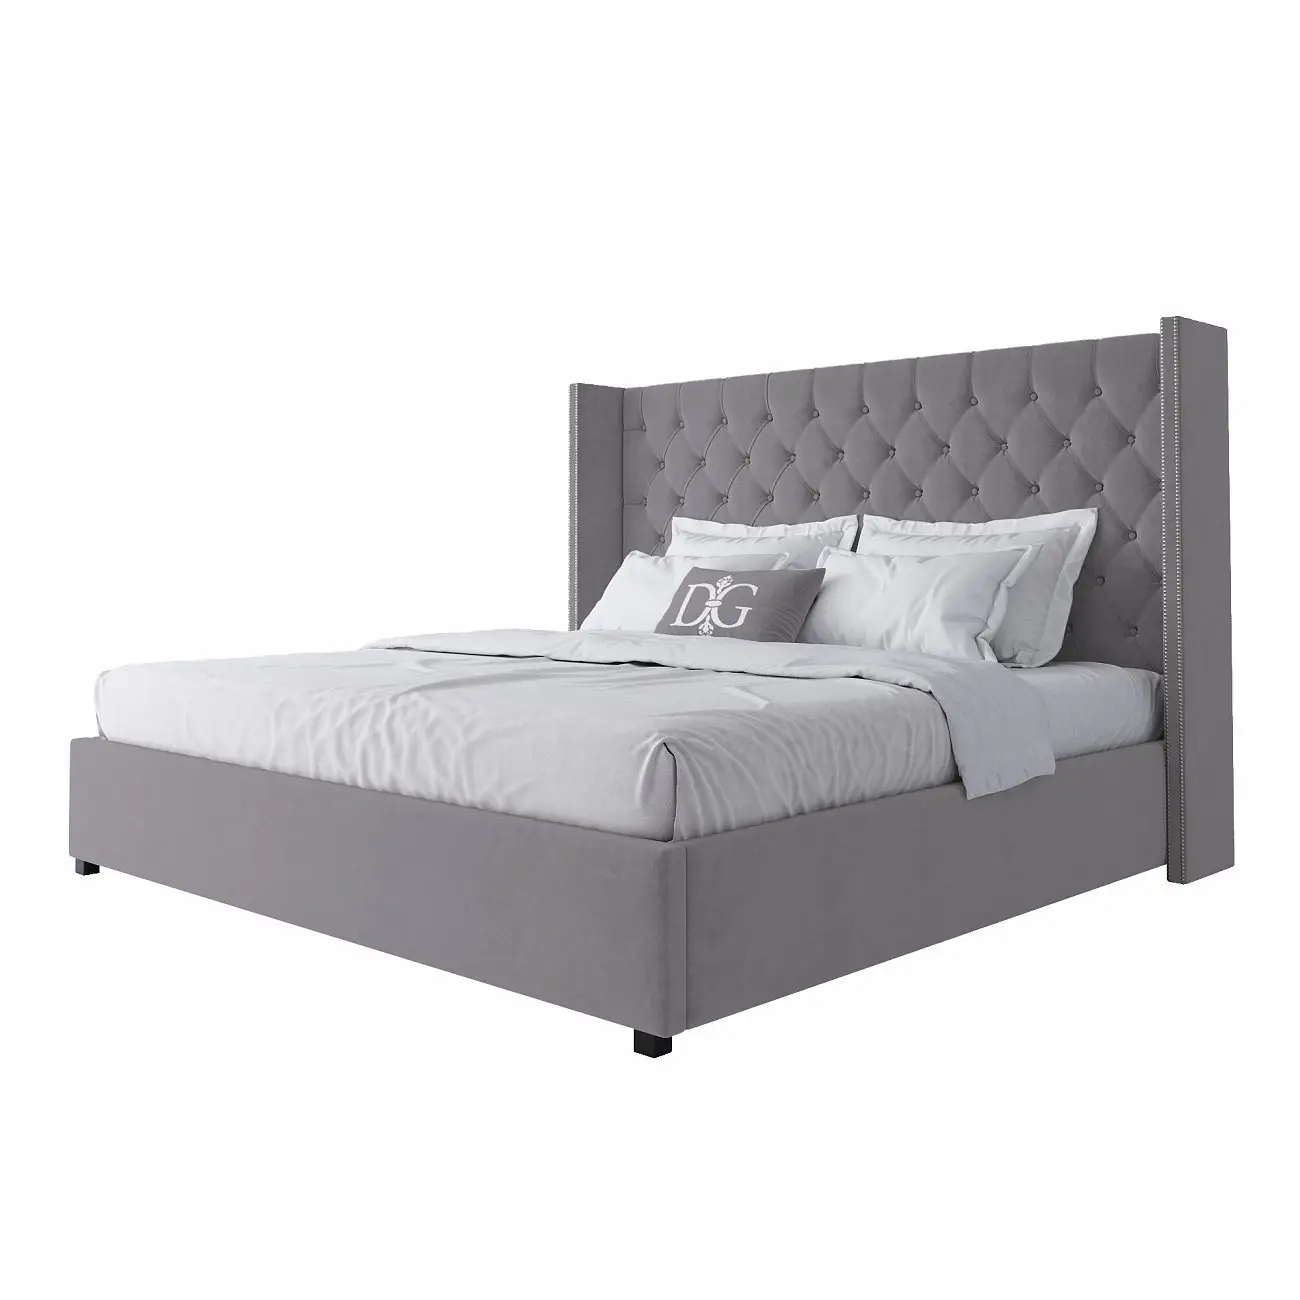 Double bed with upholstered headboard 200x200 cm grey Wing